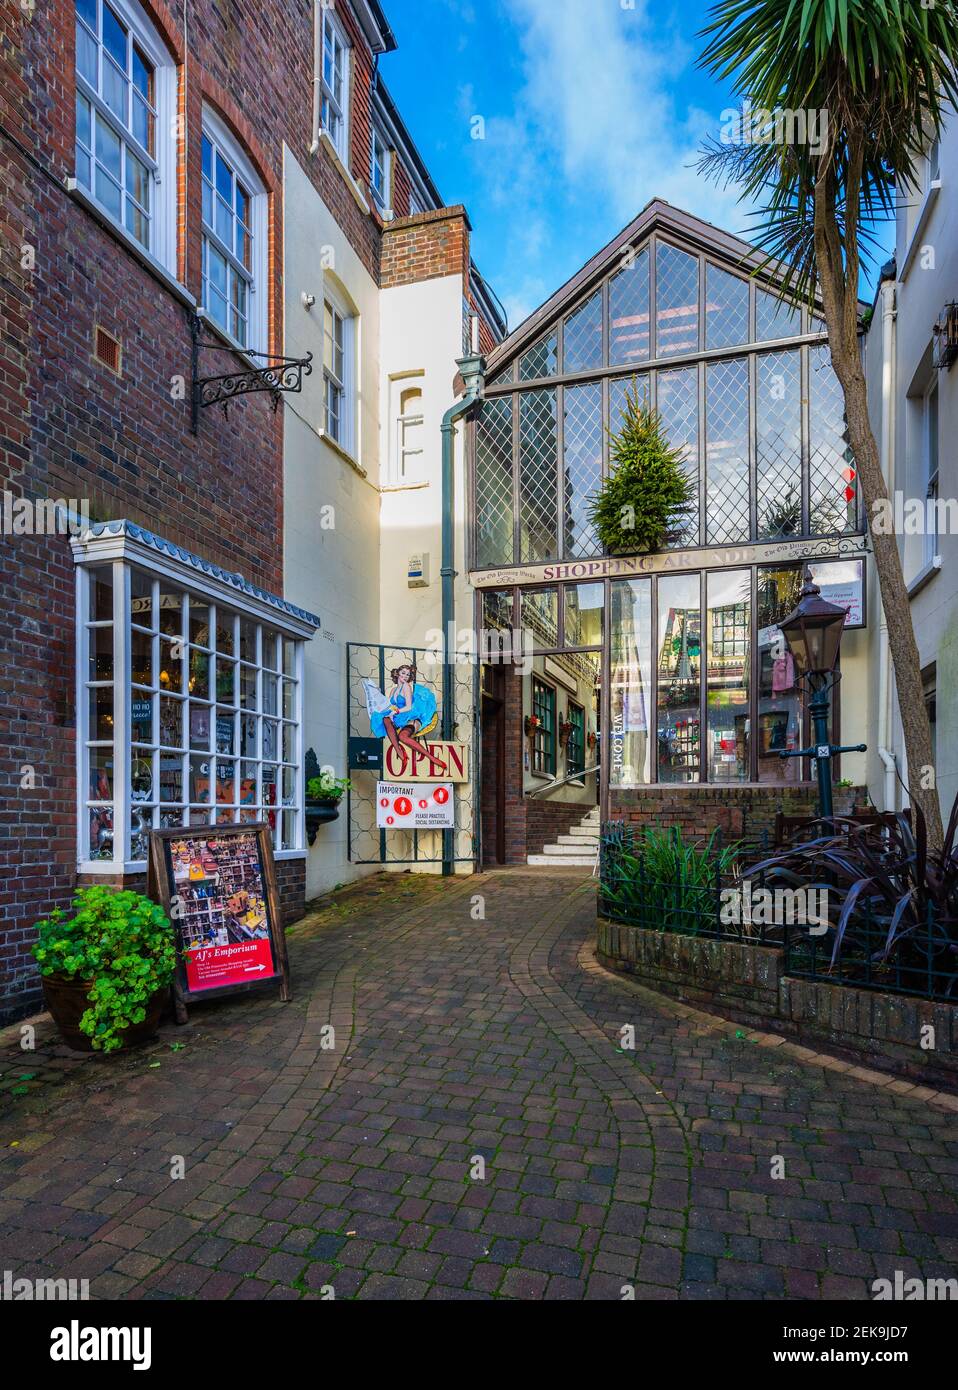 The Old Printing Works Shopping Arcade entrance in Arundel, West Sussex, England, UK. Stock Photo